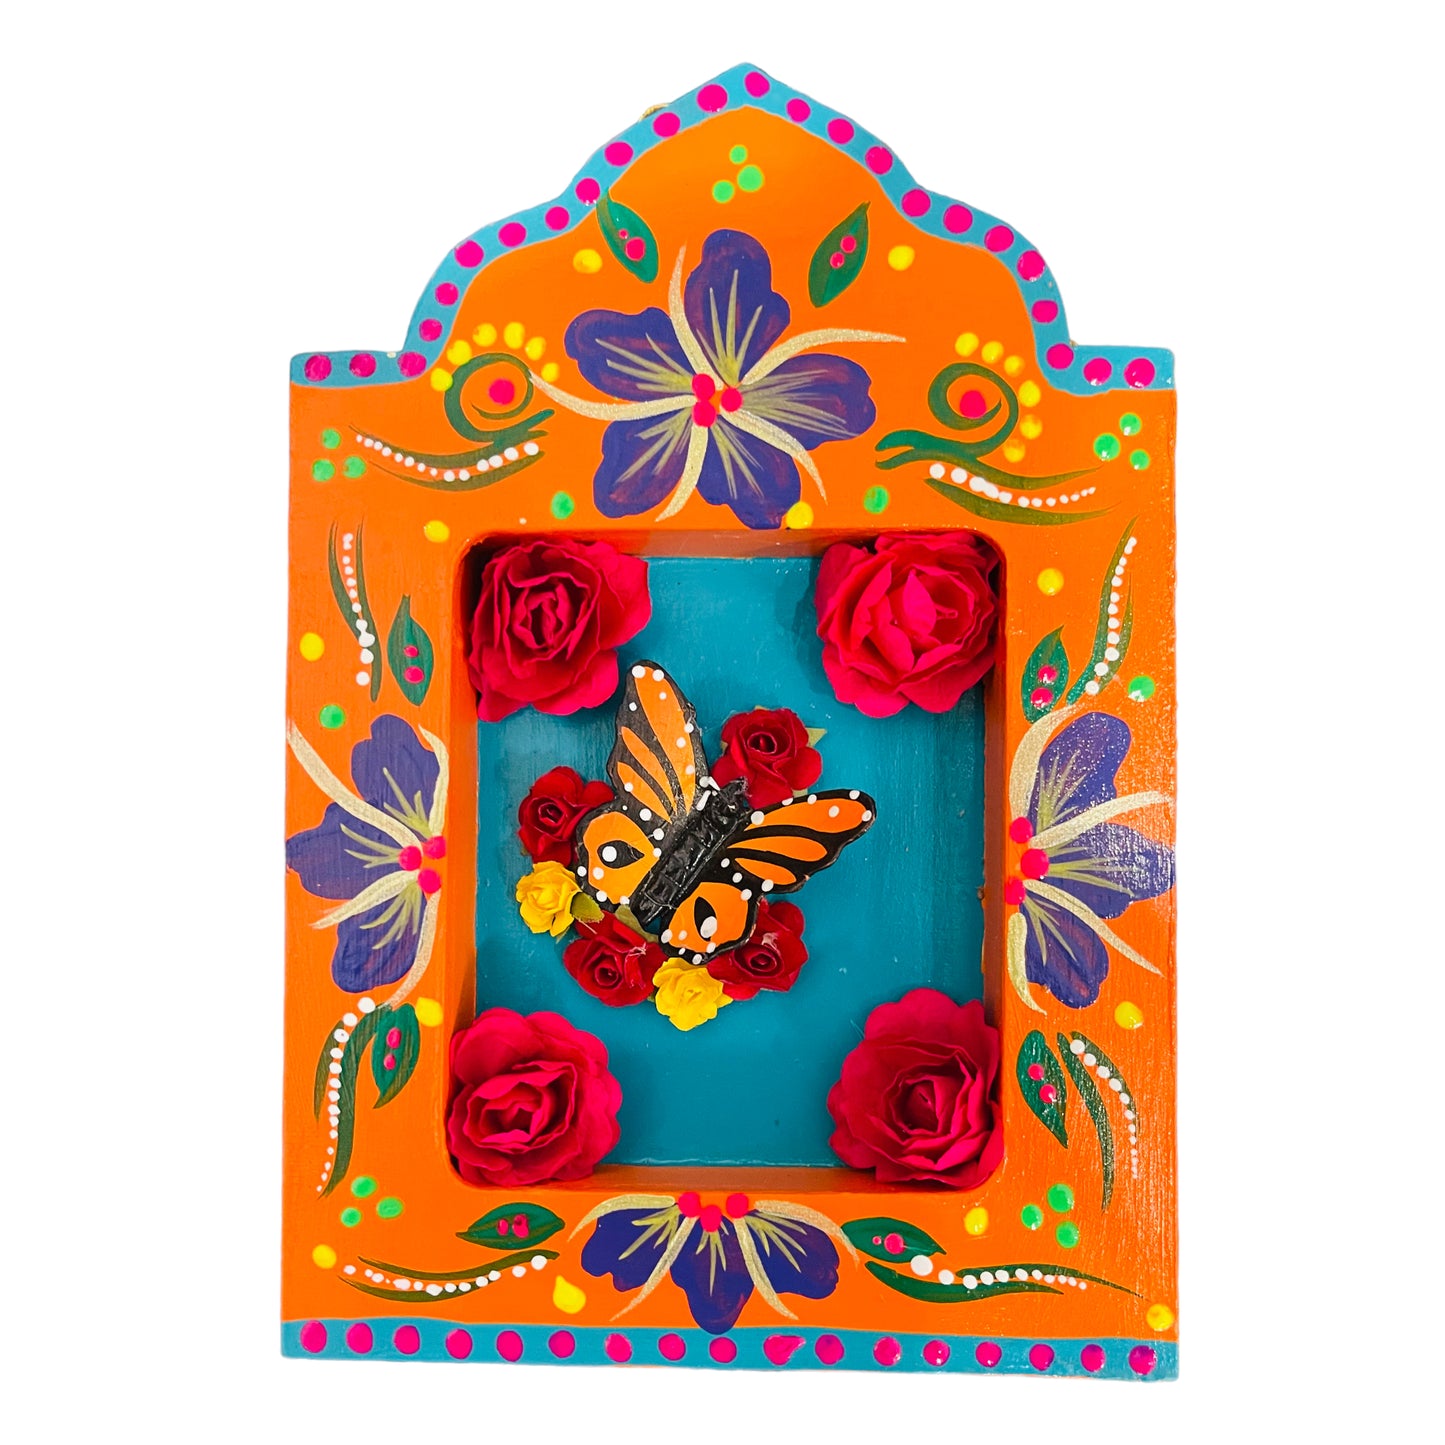 Hand painted cultural niches for home decoration. In the center of the wooden box are four red roses and a handmade orange butterfly with blue background. Around it are hand painted some purple flowers, yellow dots and green leaves 